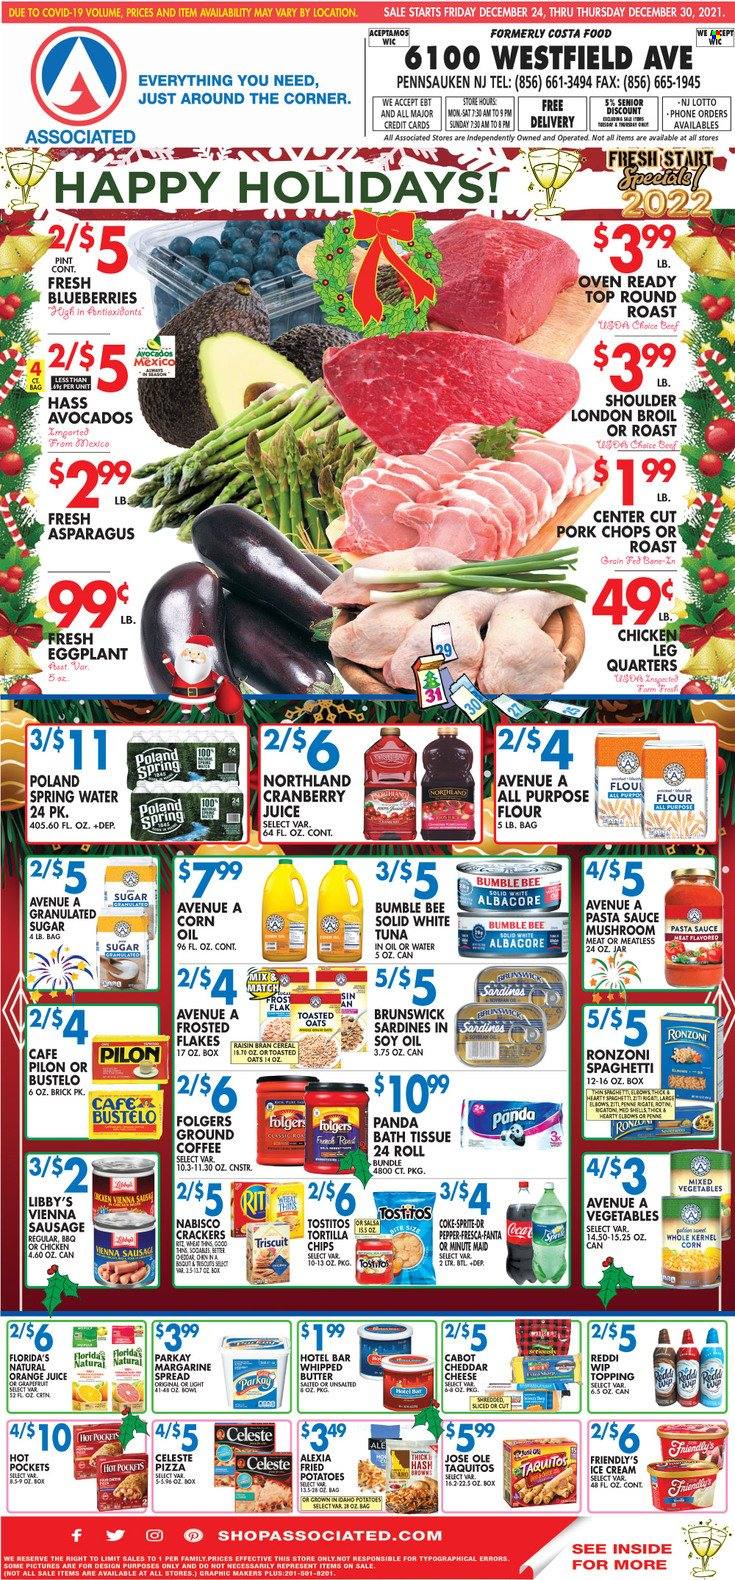 thumbnail - Associated Supermarkets Flyer - 12/24/2021 - 12/30/2021 - Sales products - tortillas, asparagus, potatoes, eggplant, avocado, blueberries, sardines, tuna, spaghetti, hot pocket, pizza, pasta sauce, Bumble Bee, sauce, taquitos, sausage, vienna sausage, margarine, whipped butter, ice cream, Friendly's Ice Cream, mixed vegetables, Celeste, crackers, Florida's Natural, chips, Tostitos, all purpose flour, granulated sugar, sugar, topping, Frosted Flakes, Raisin Bran, toasted oats, penne, corn oil, Coca-Cola, cranberry juice, Sprite, orange juice, juice, Fanta, Dr. Pepper, spring water, coffee, Folgers, ground coffee, chicken legs, beef meat, round roast, pork chops, pork meat, bath tissue. Page 1.